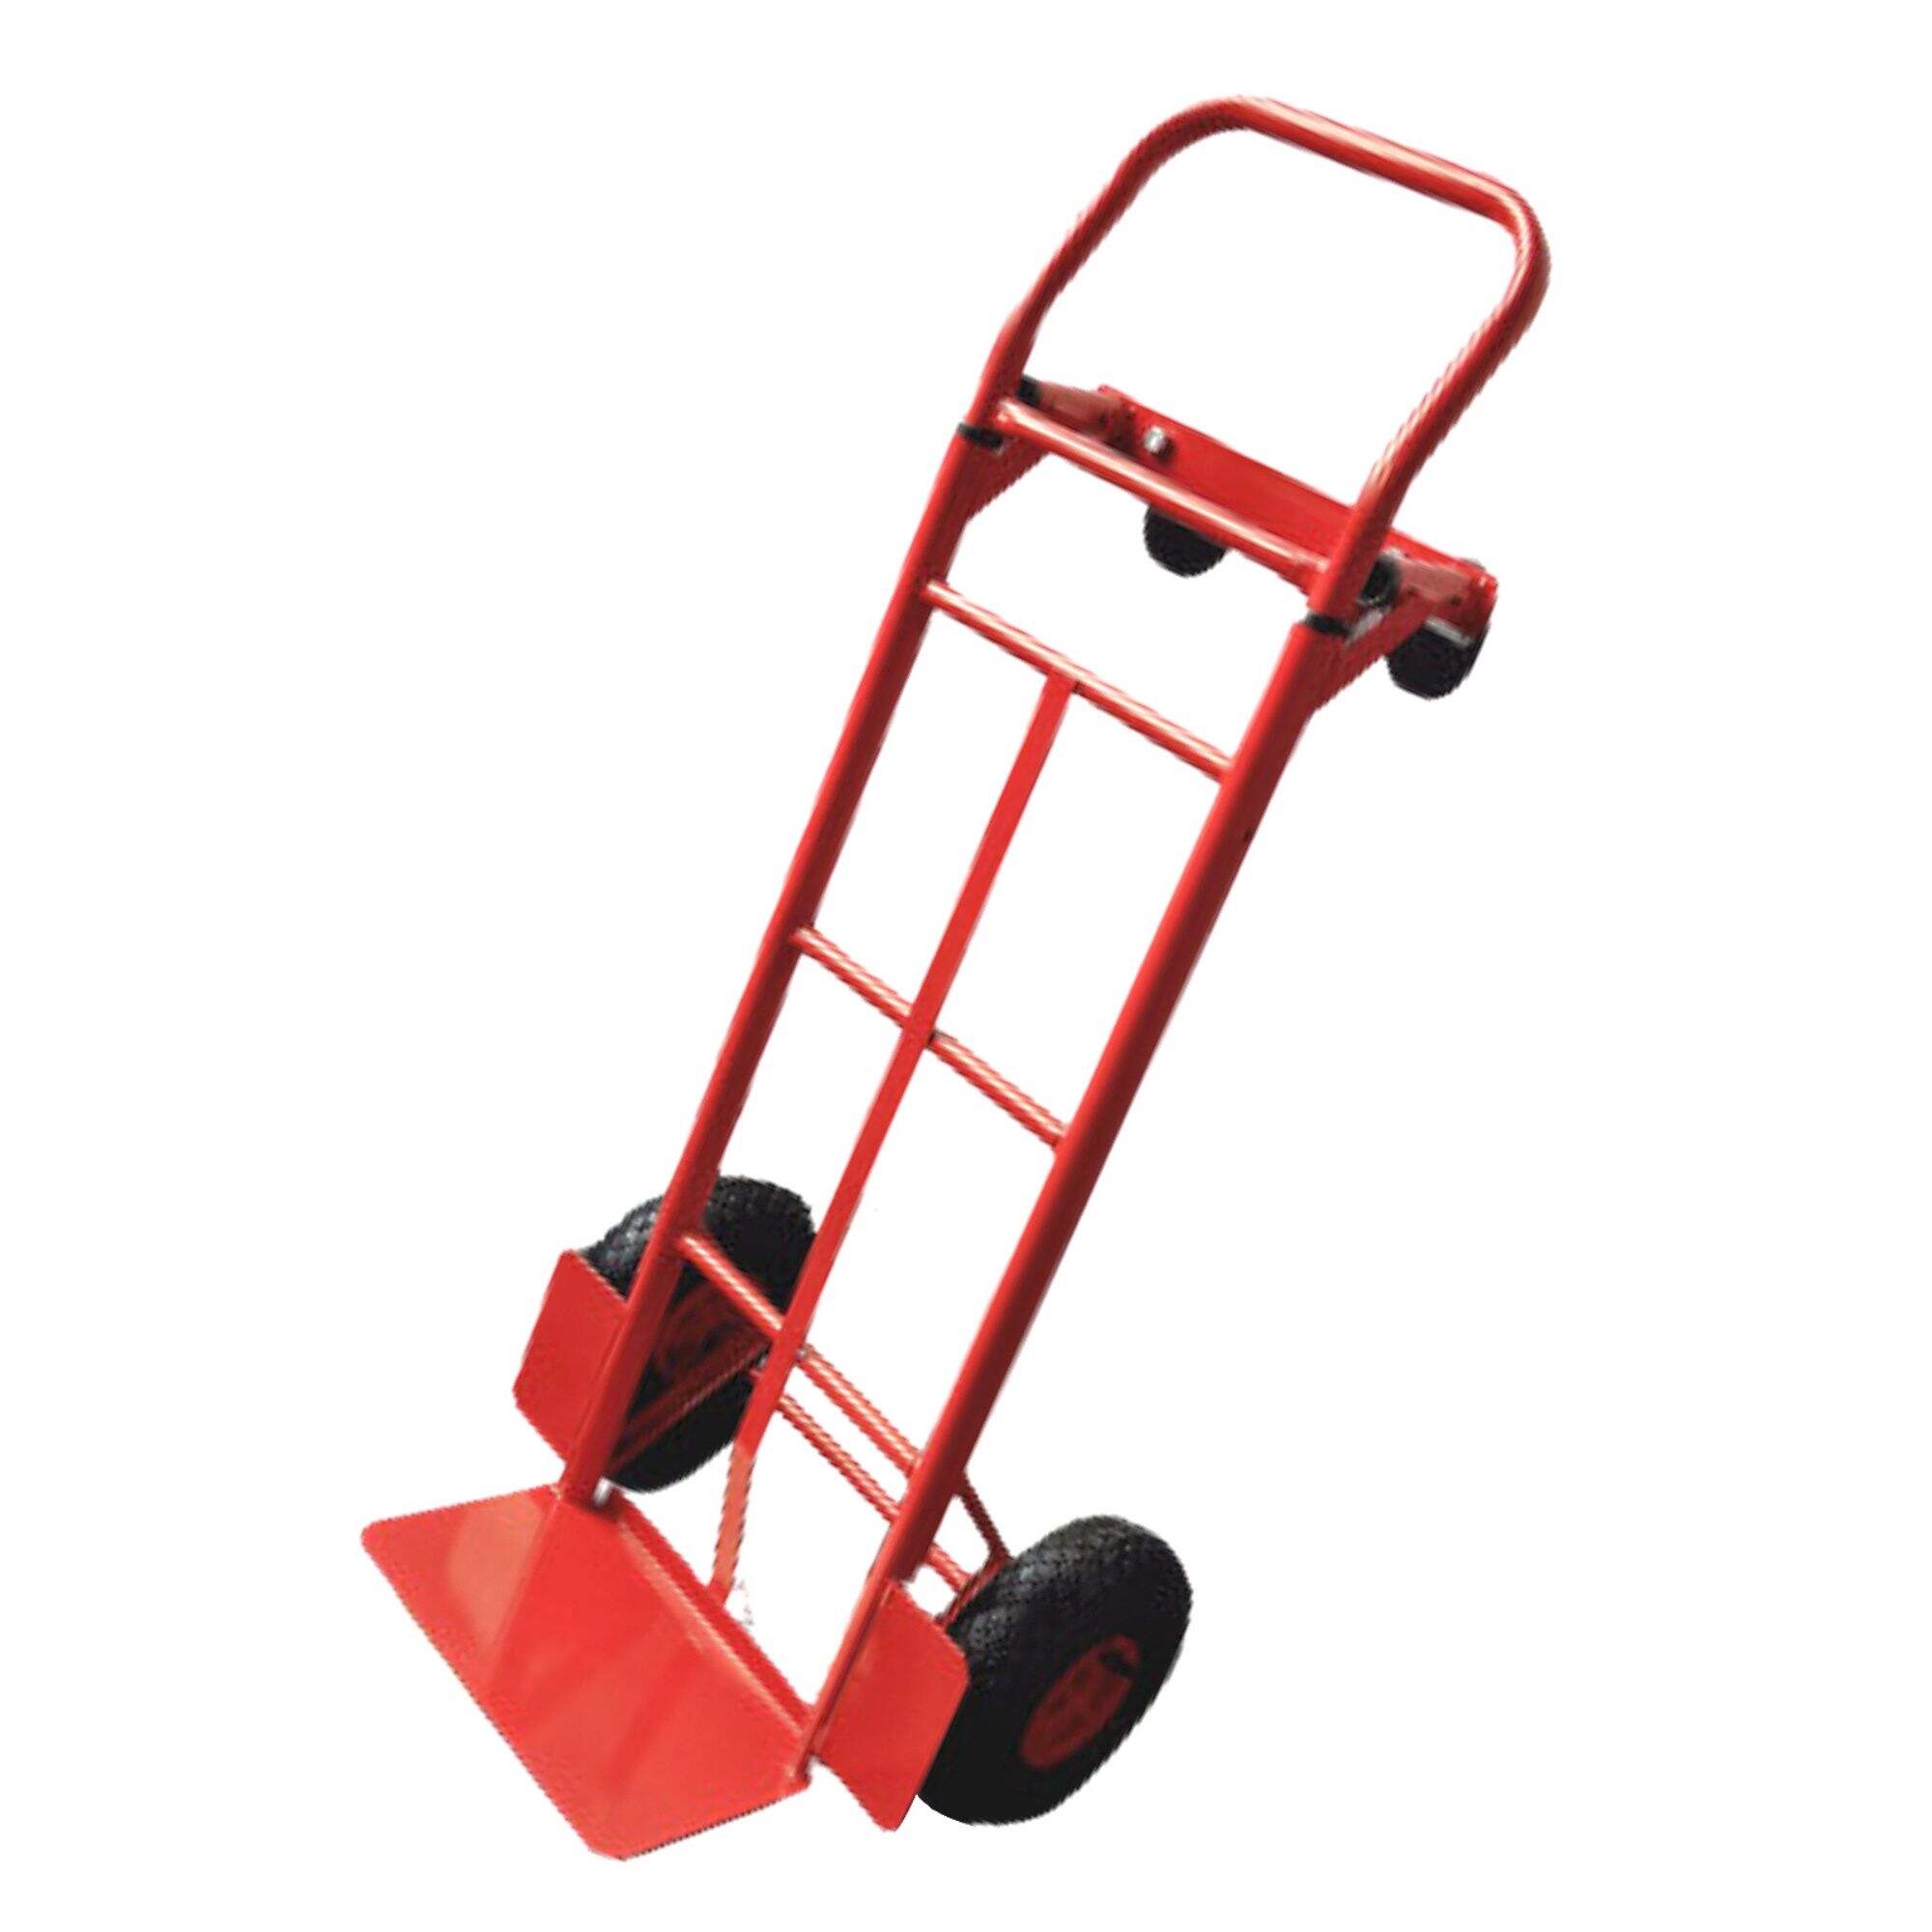 HT1824 Steel 2 in 1 Hand Truck, Hand Dolly Cart Trolley, with 4.10/3.50-4 Pneumatic Wheel